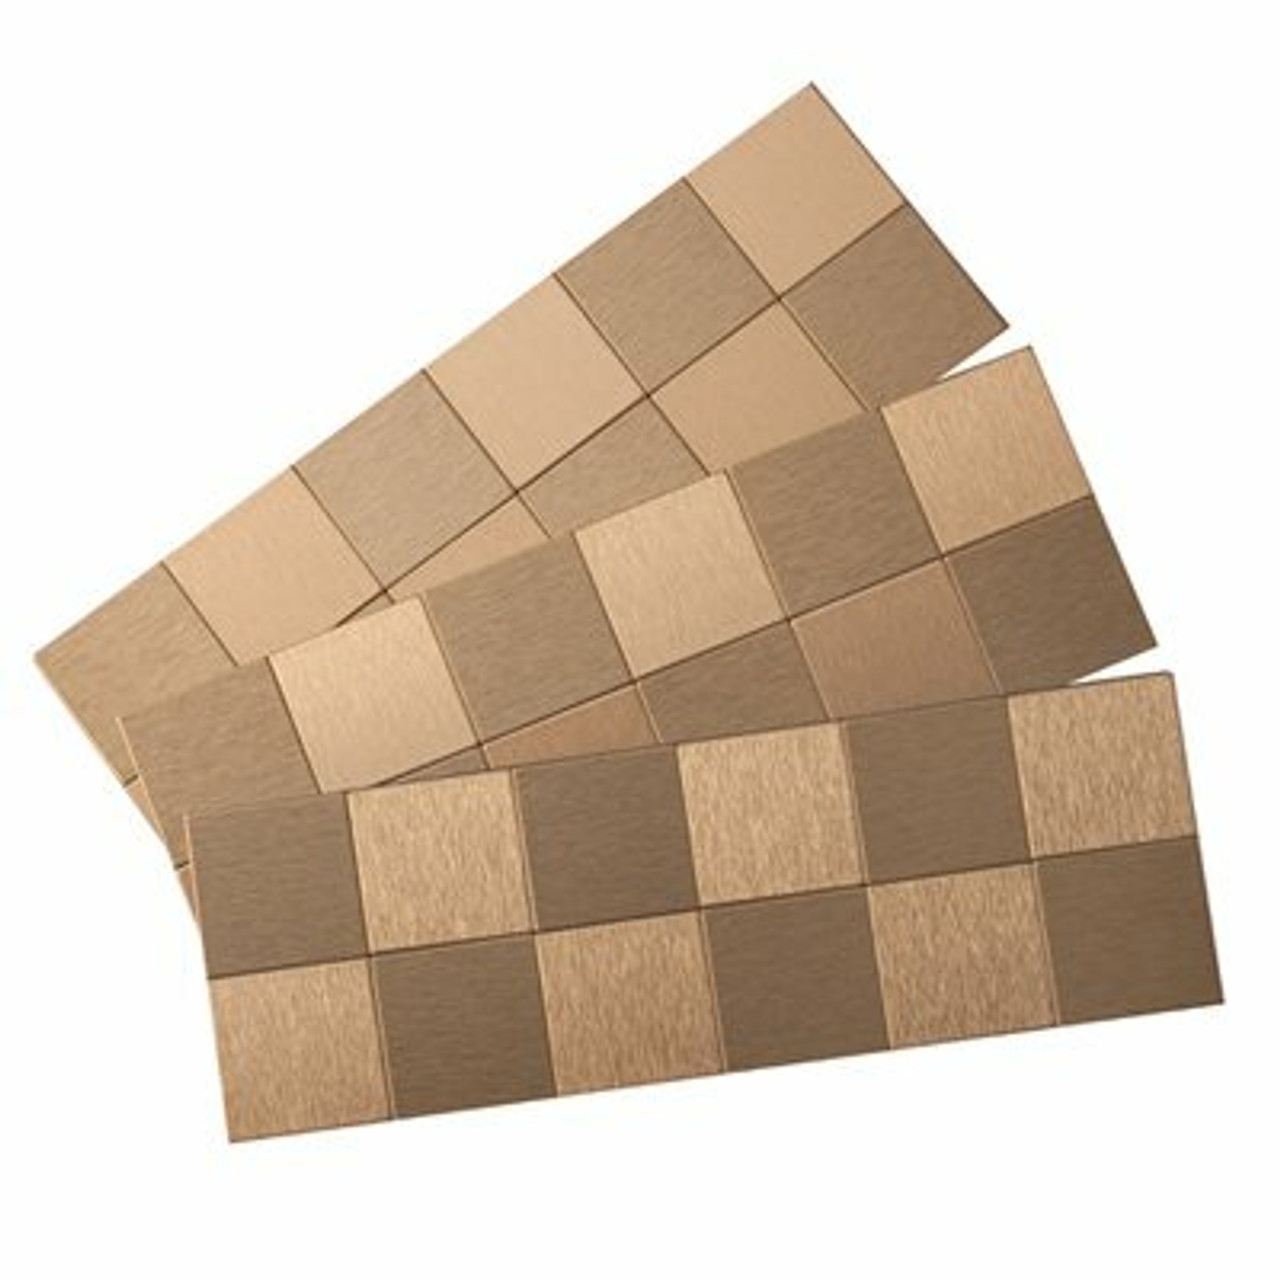 Aspect Square Matted 12 In. X 4 In. Brushed Champagne Metal Decorative Tile Backsplash (1 Sq. Ft.)